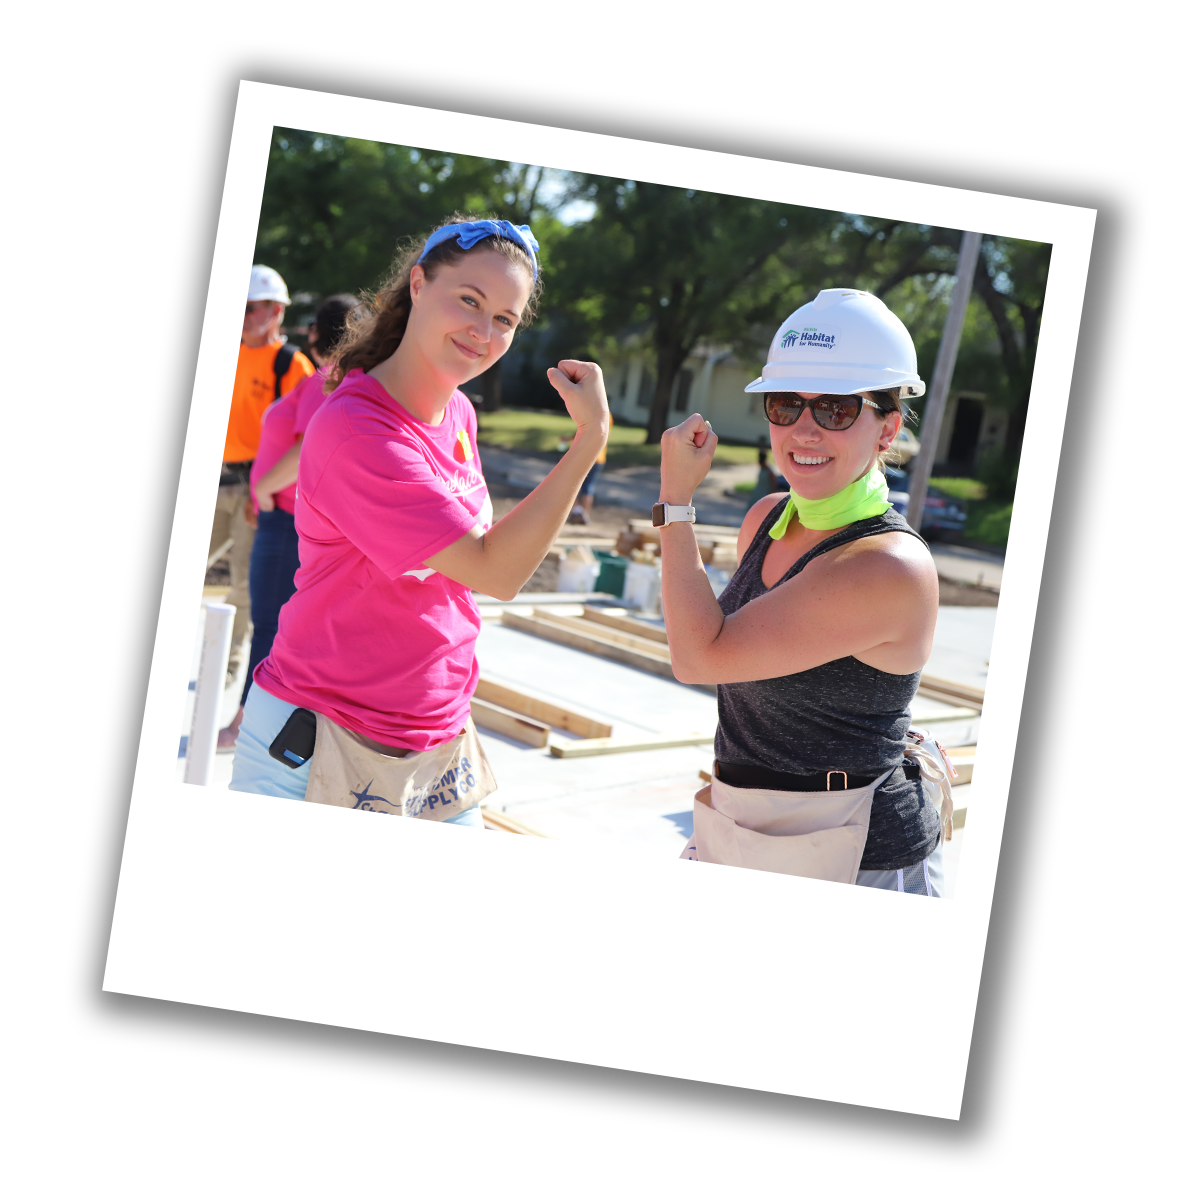 Two women flexing their arms at a Women Build event.